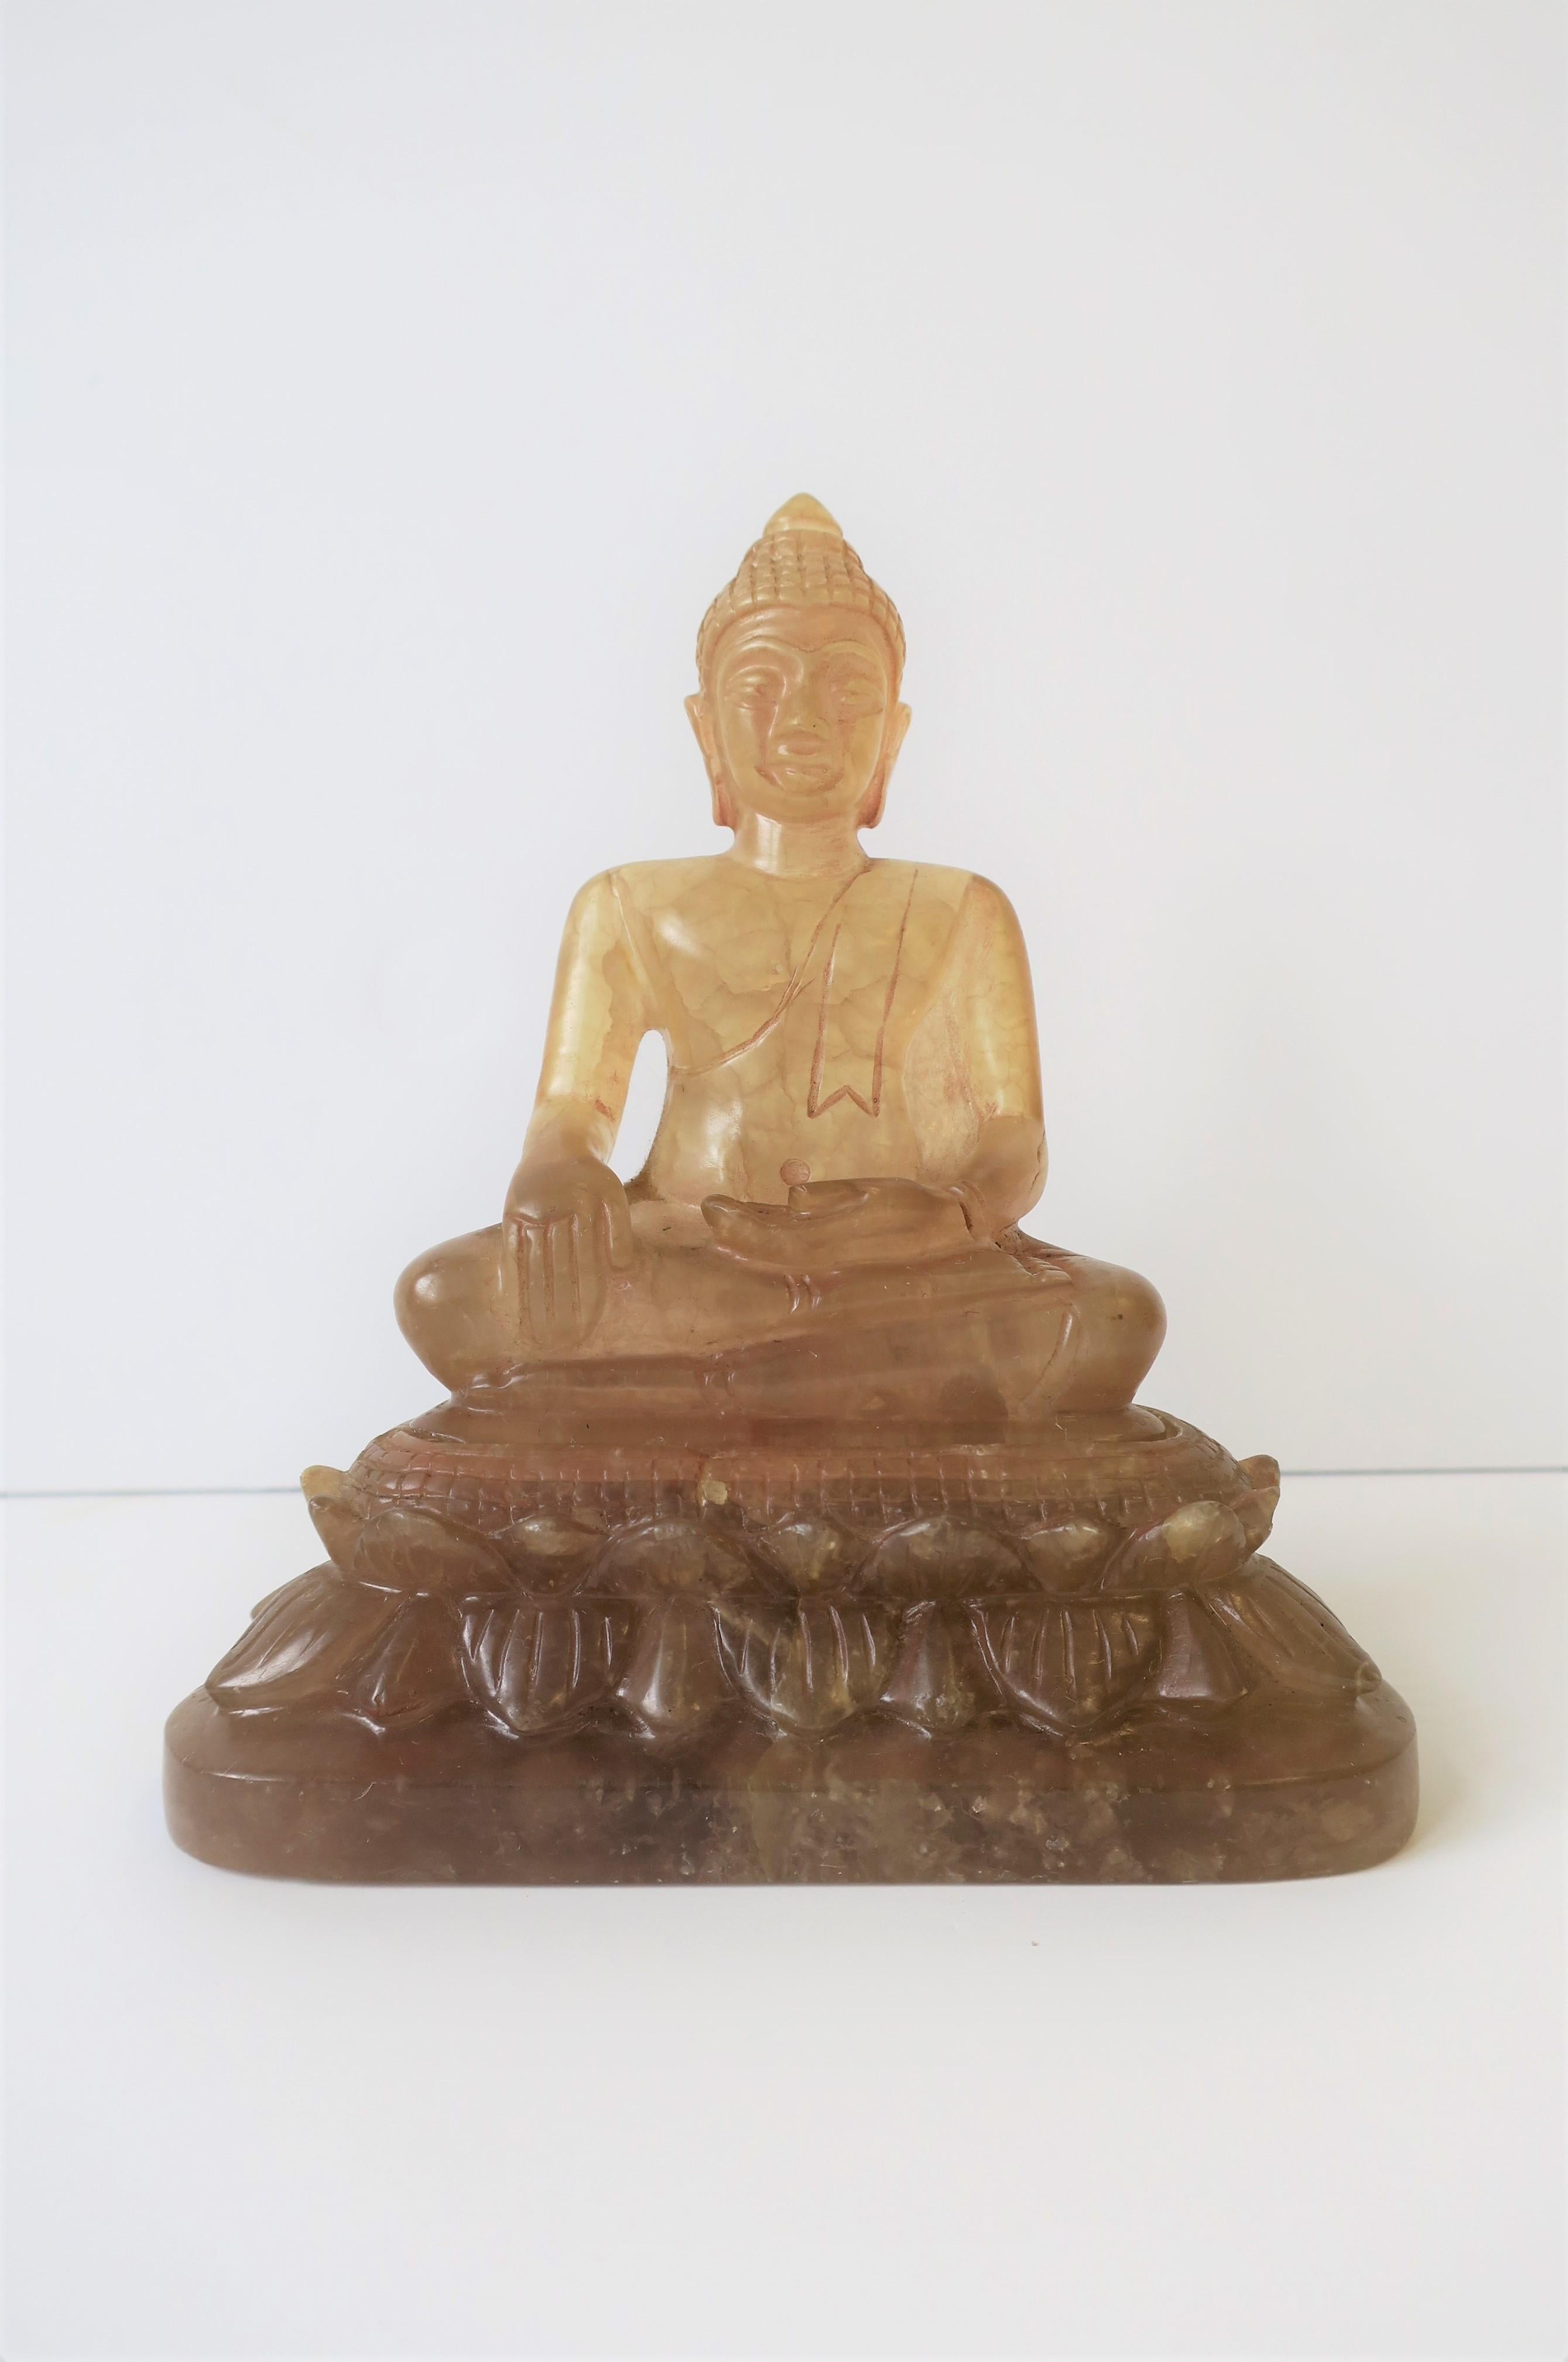 A beautiful carved rock crystal seated Buddha sculpture piece, circa 20th Century, China. Rock crystal Buddha has a light pink/rose/flesh-tone hue to it. Marked on base as show in image #14.

Piece measures: 3.5